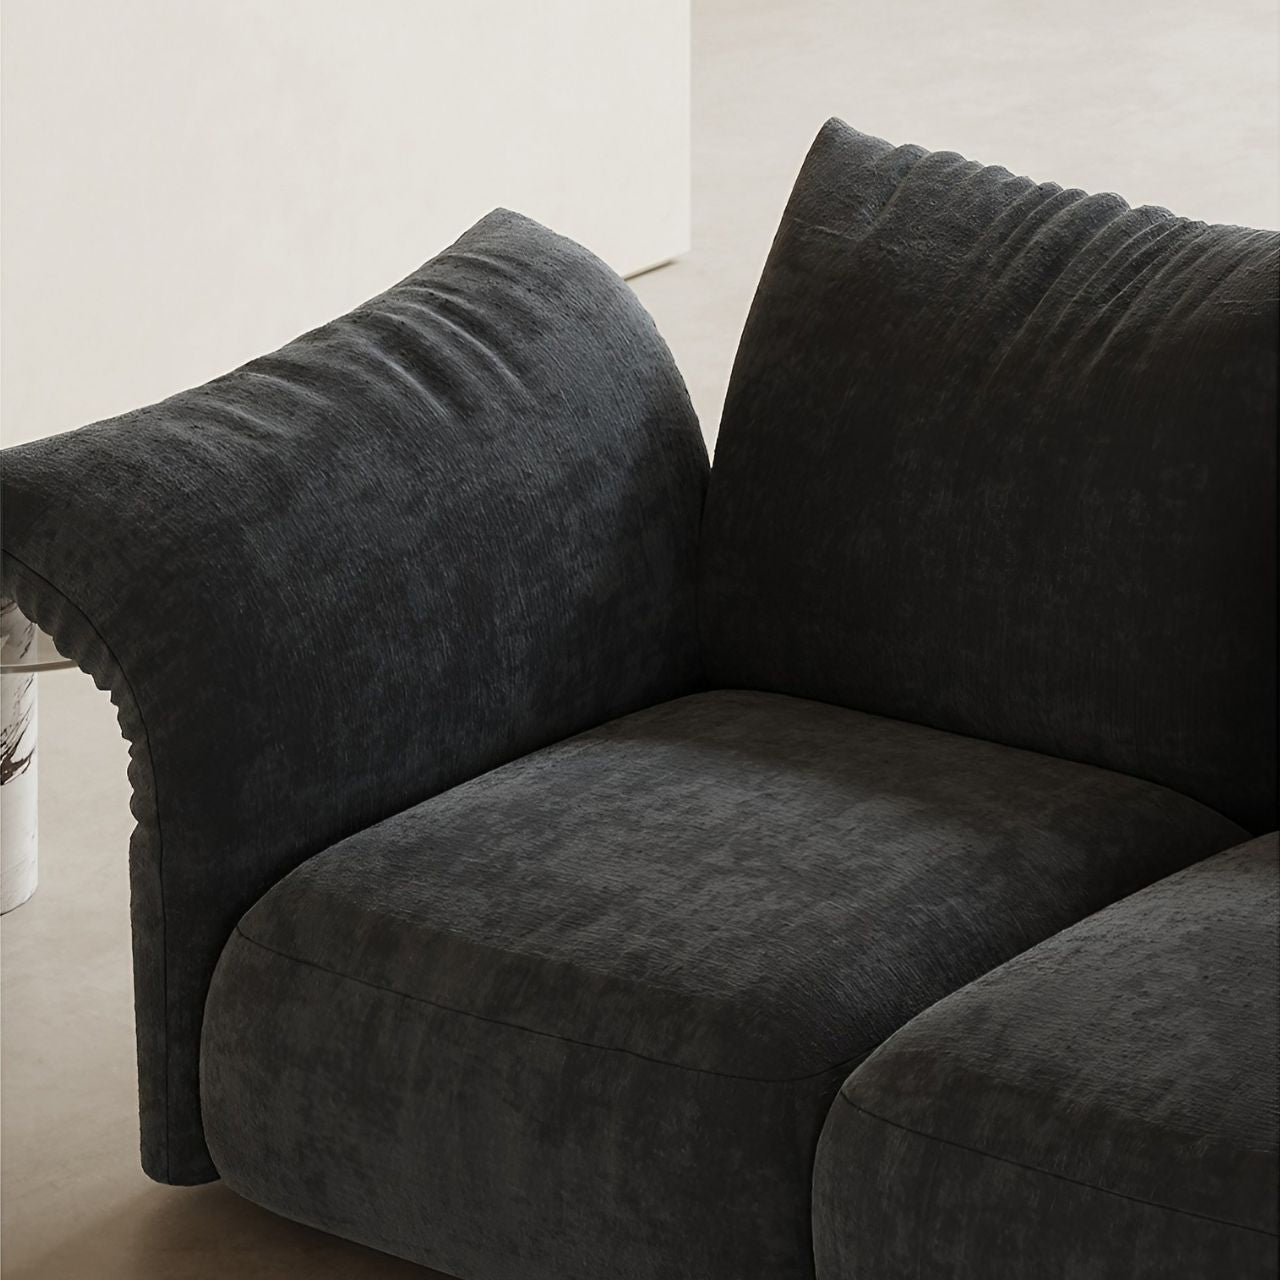 Minimalist Petal-Shaped Casual Sofa in Soft Chenille Material